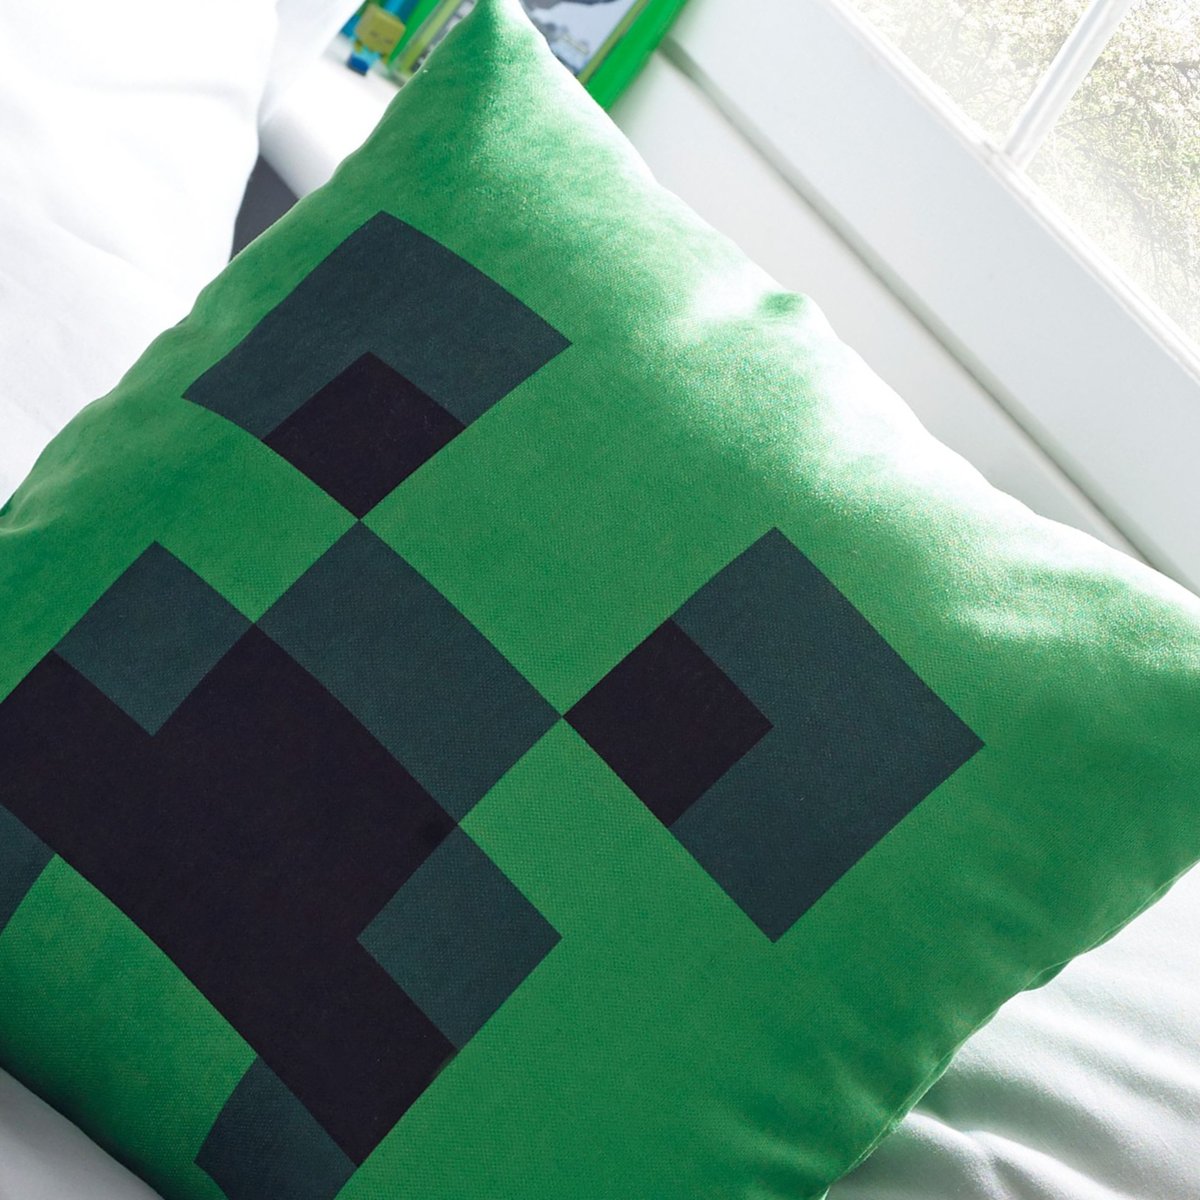 National hugging day - grab your creeper and cuddle up!